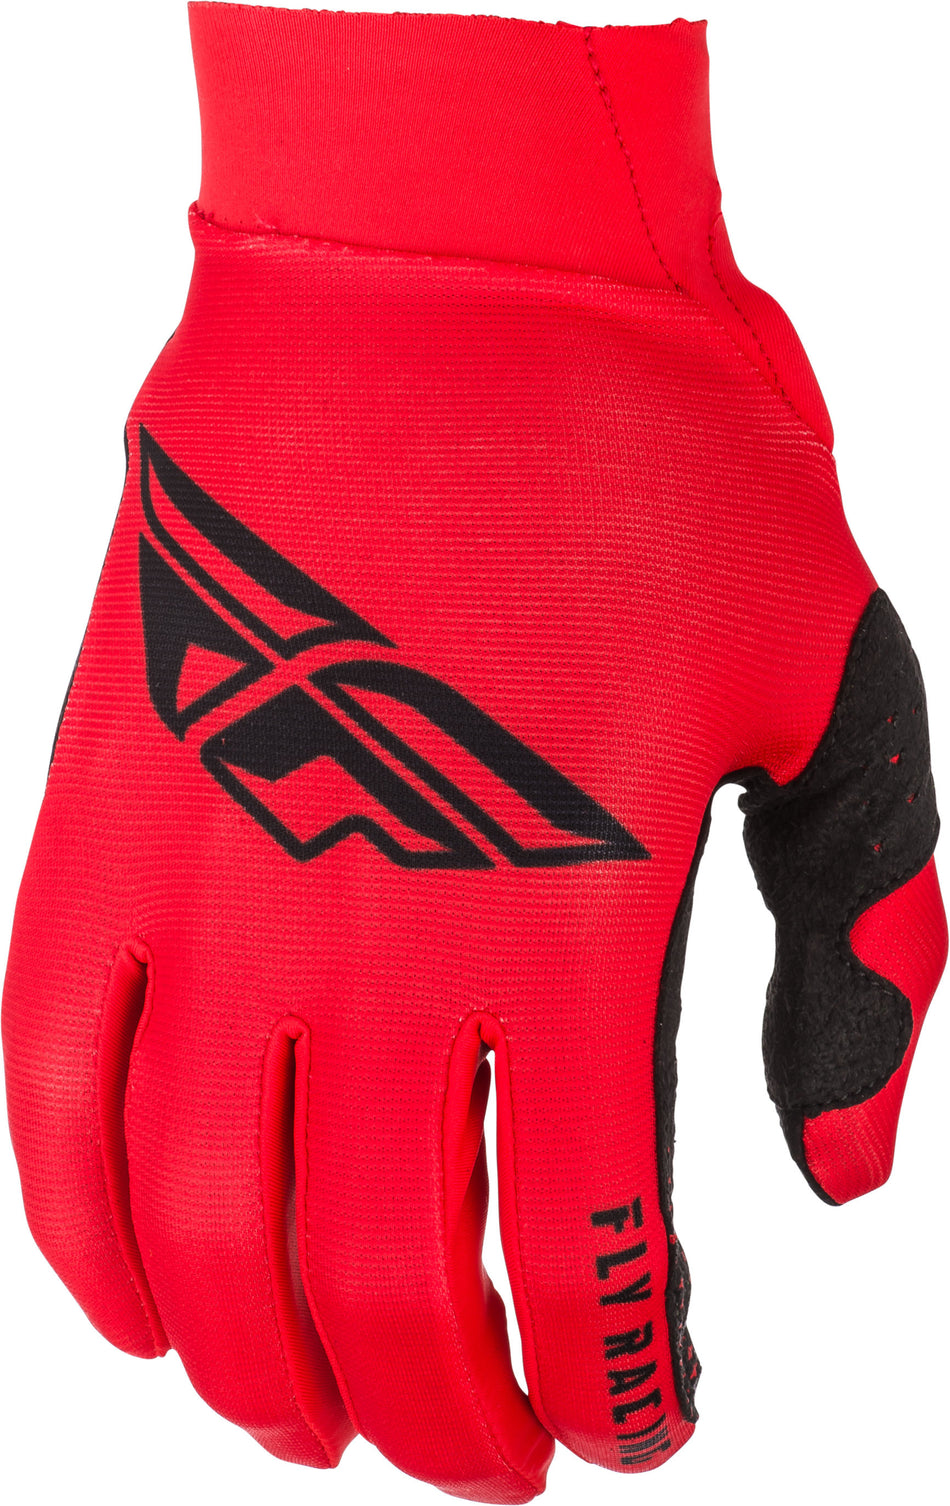 FLY RACING Pro Lite Gloves Red/Black Sz 08 372-81208